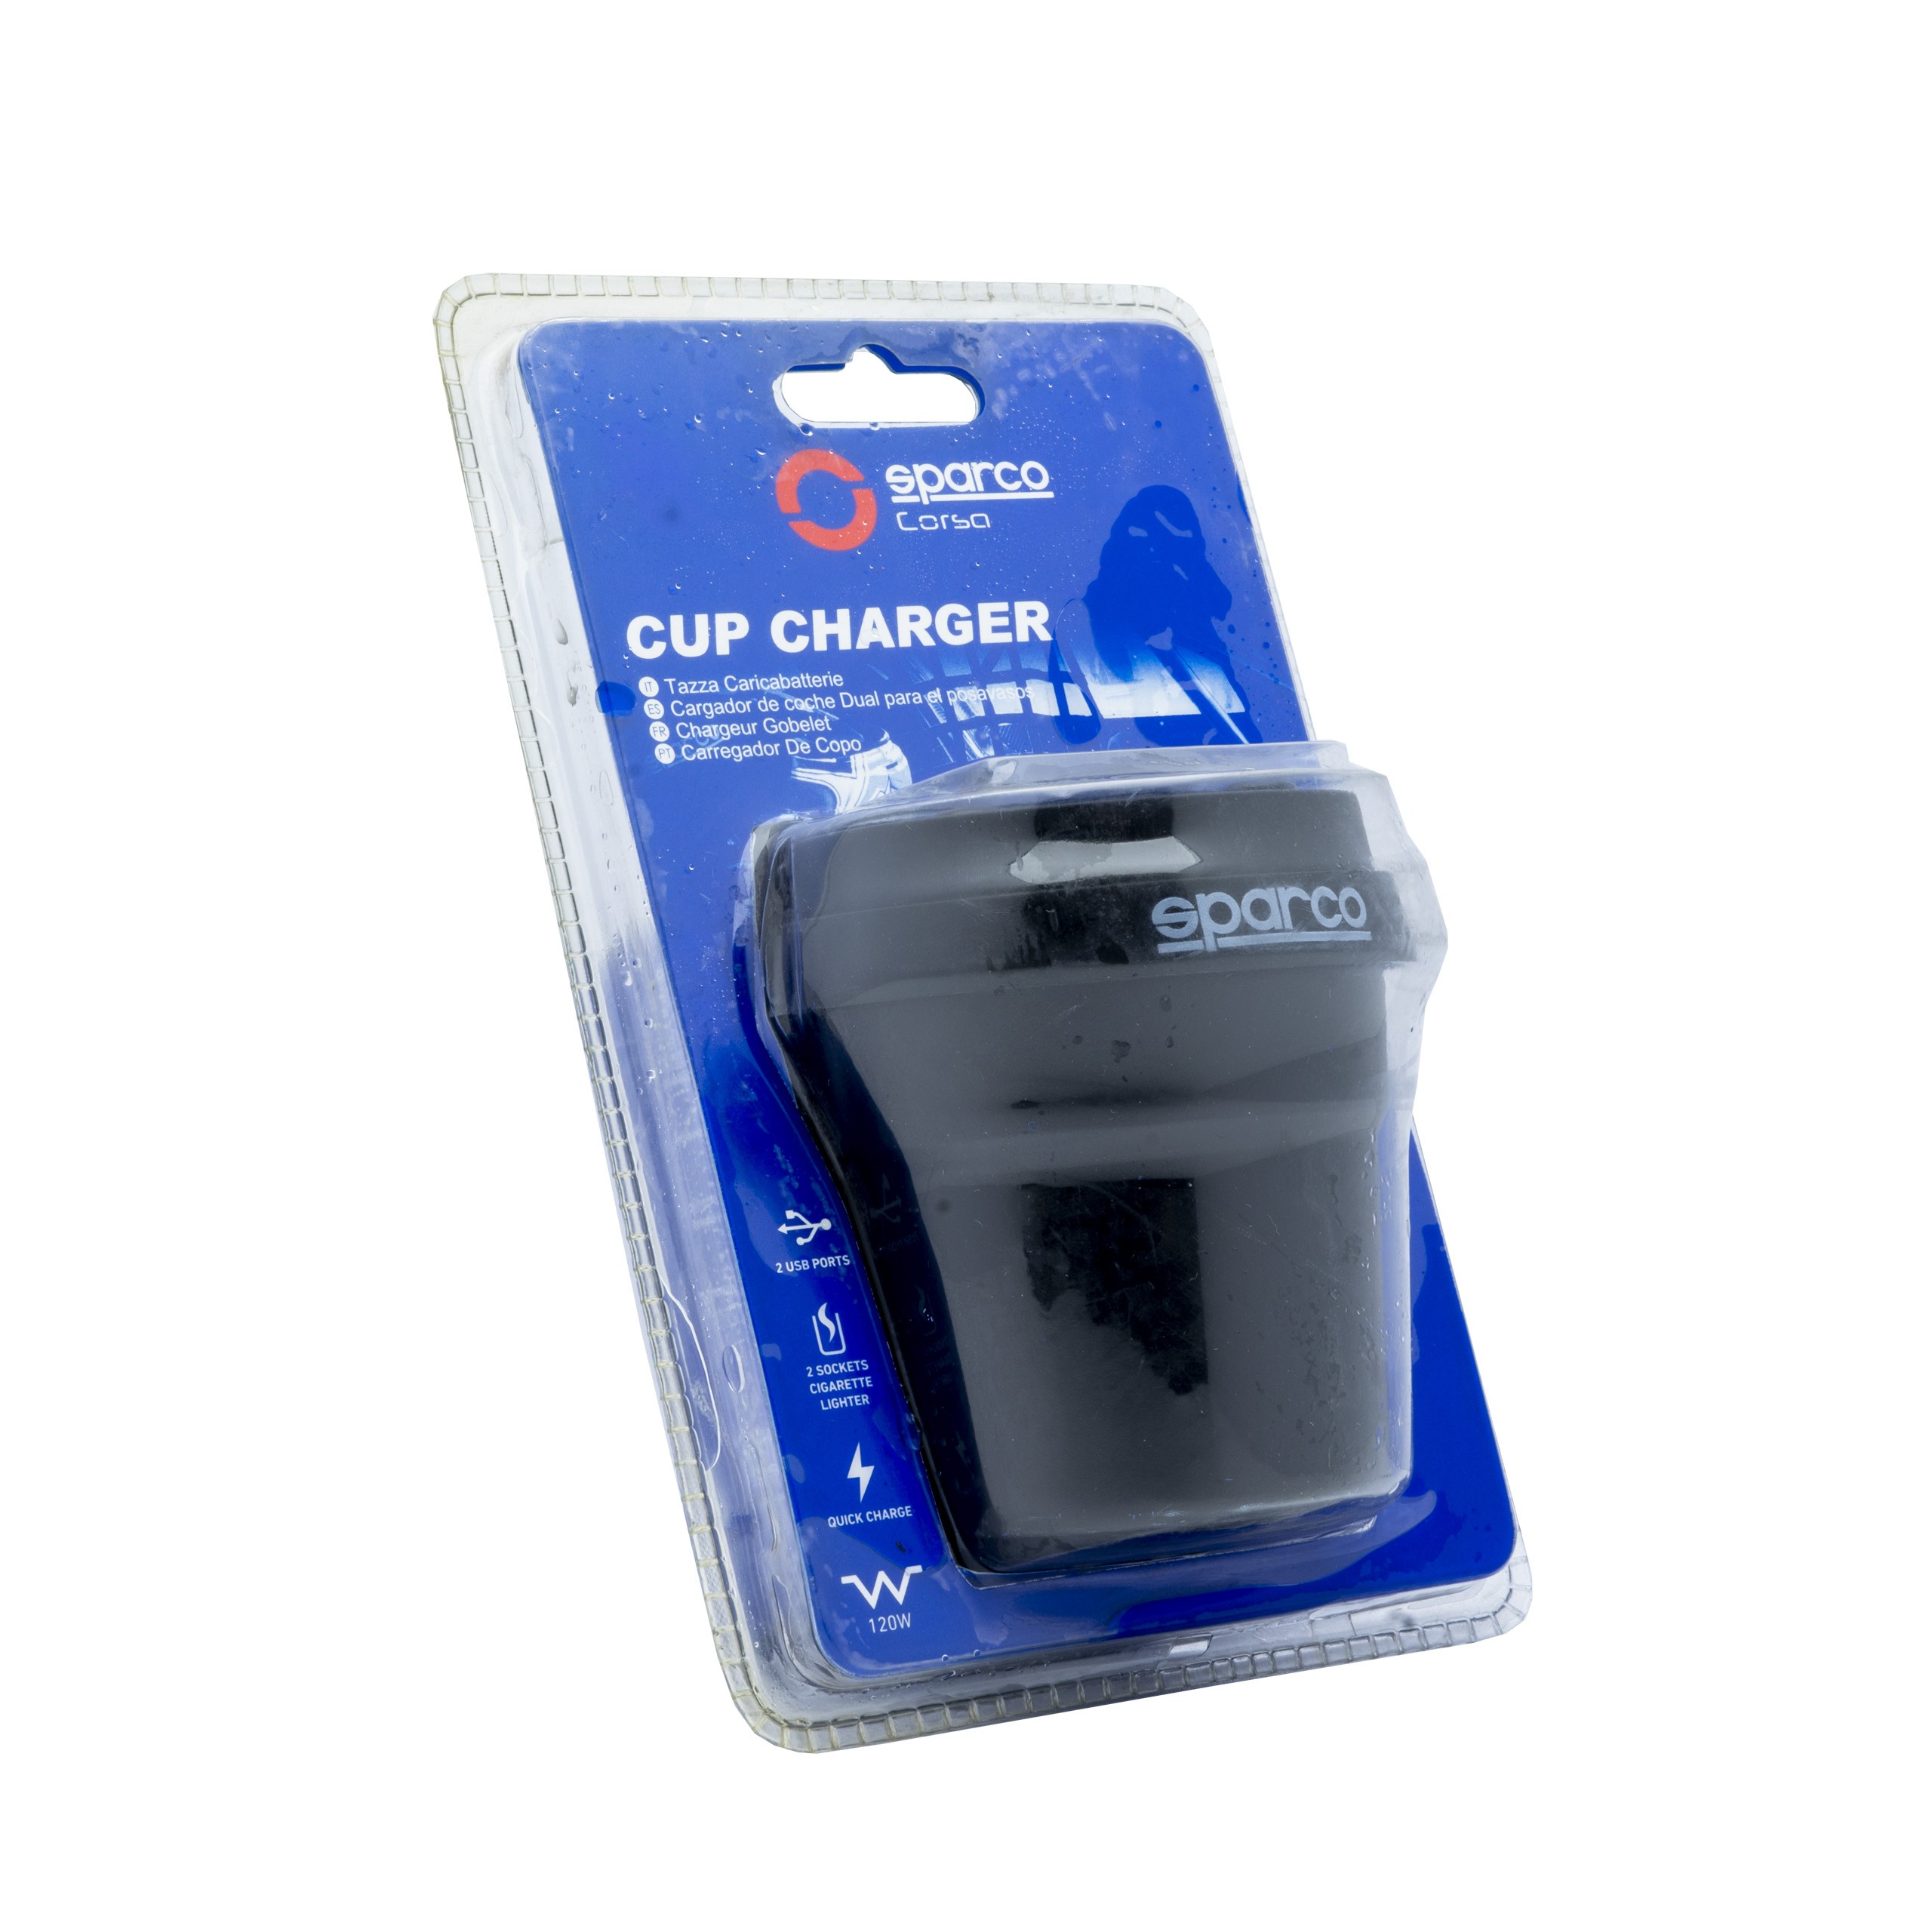 SPC5002 SPARCO CUP CHARGER 3.1A ABS BLACK